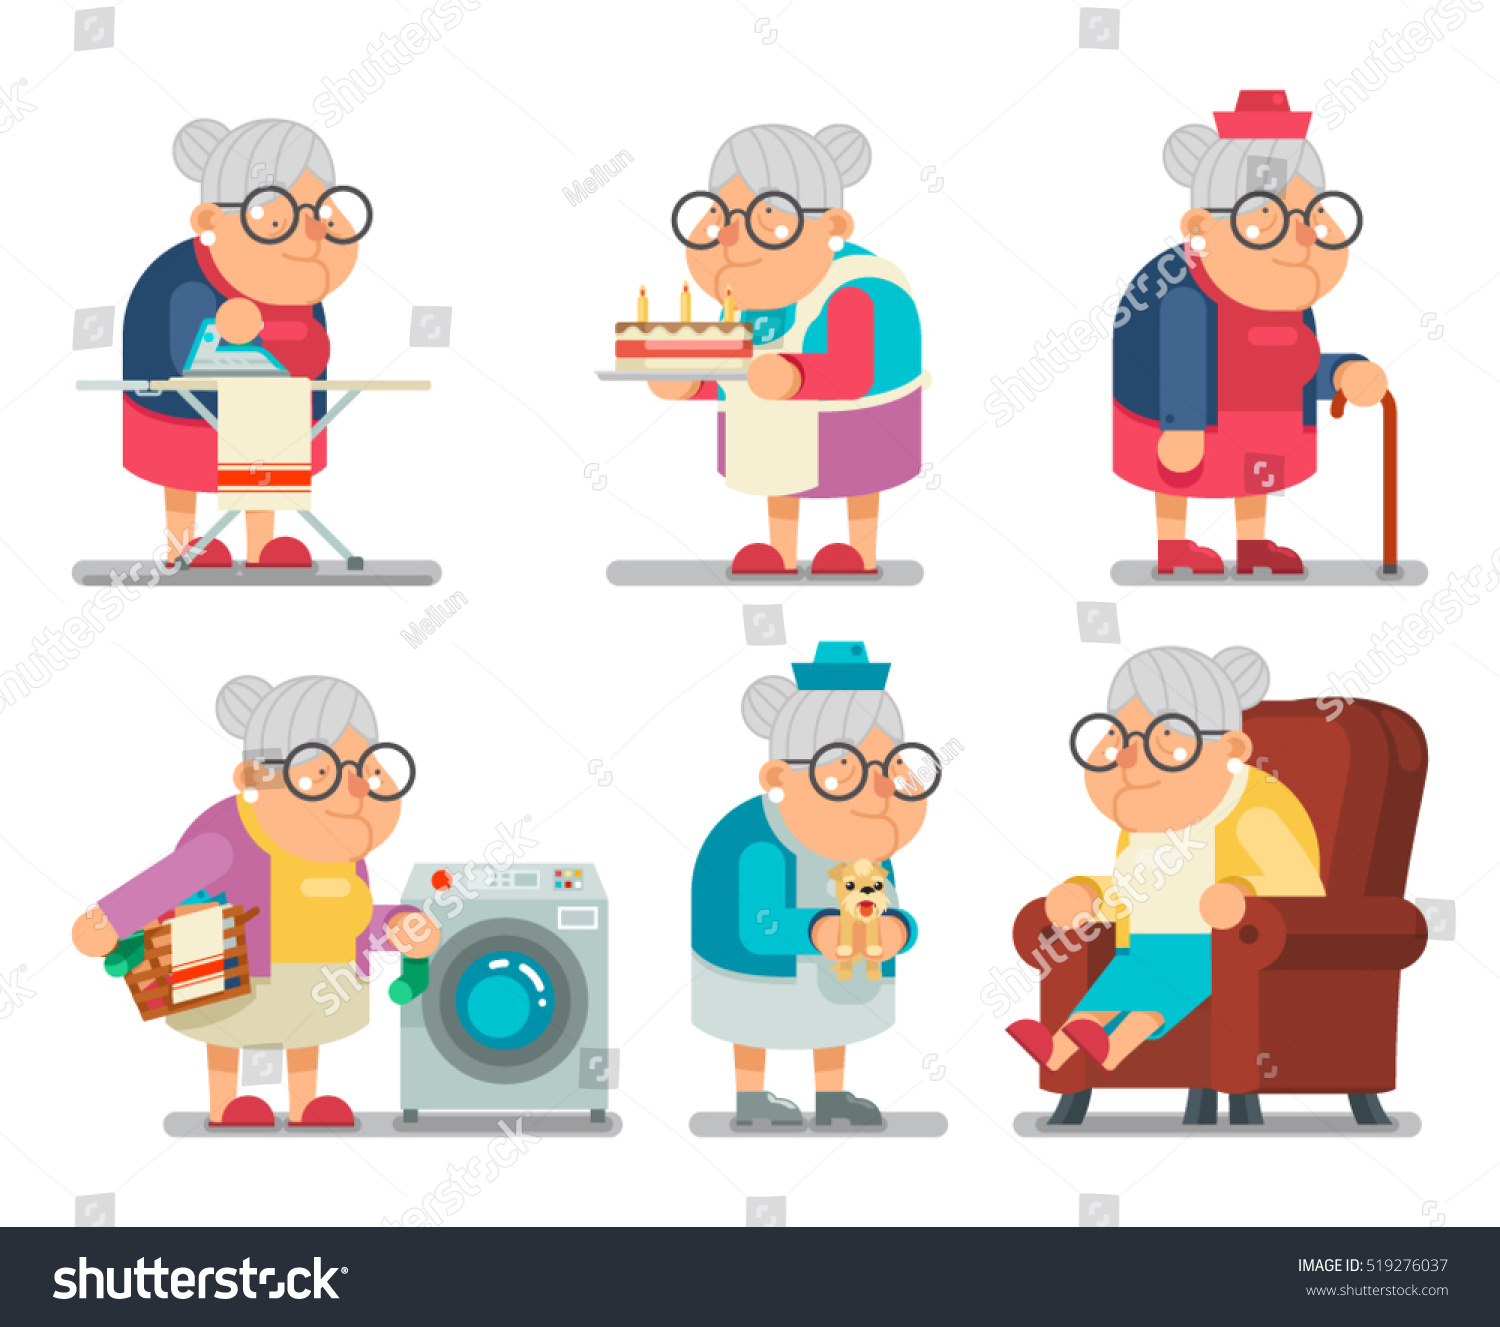 Household Granny Old Lady Character Cartoon Stock Vector Royalty Free Shutterstock